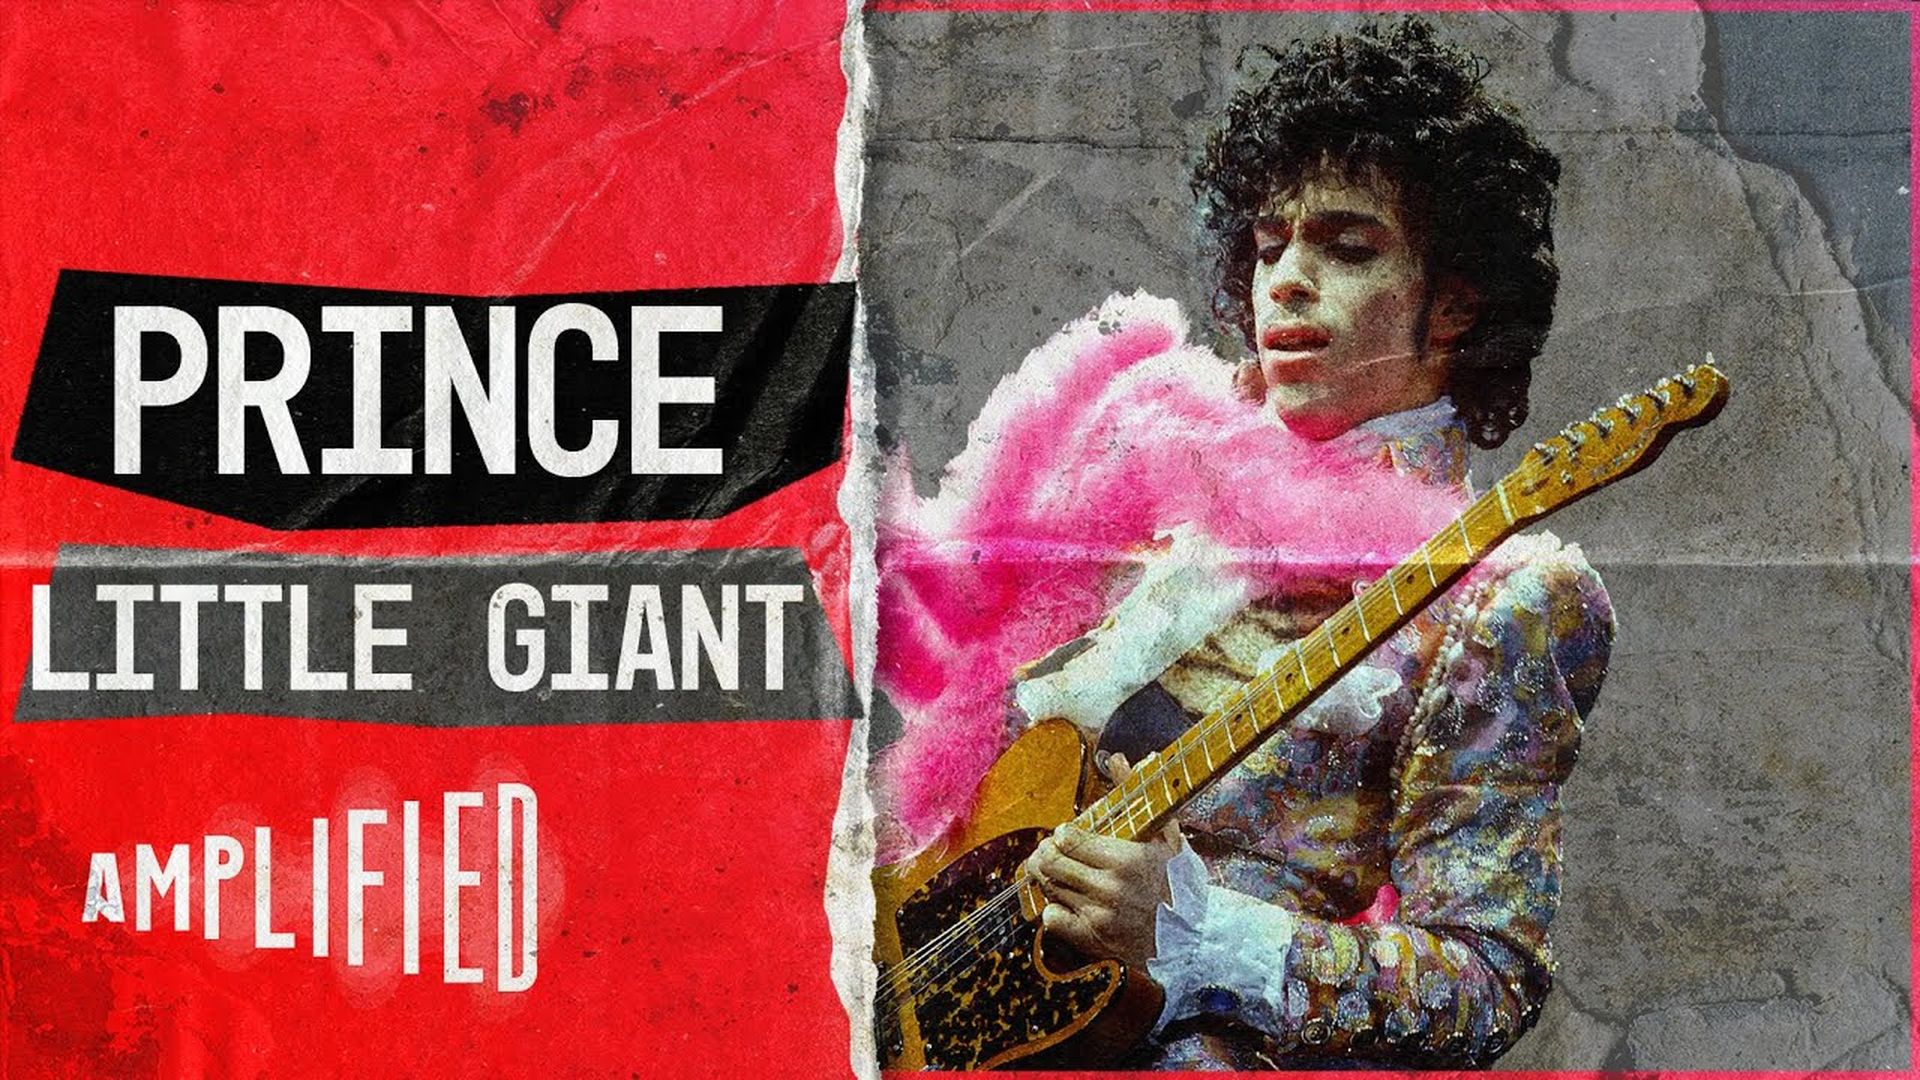 Prince - The Little Giant Amplified